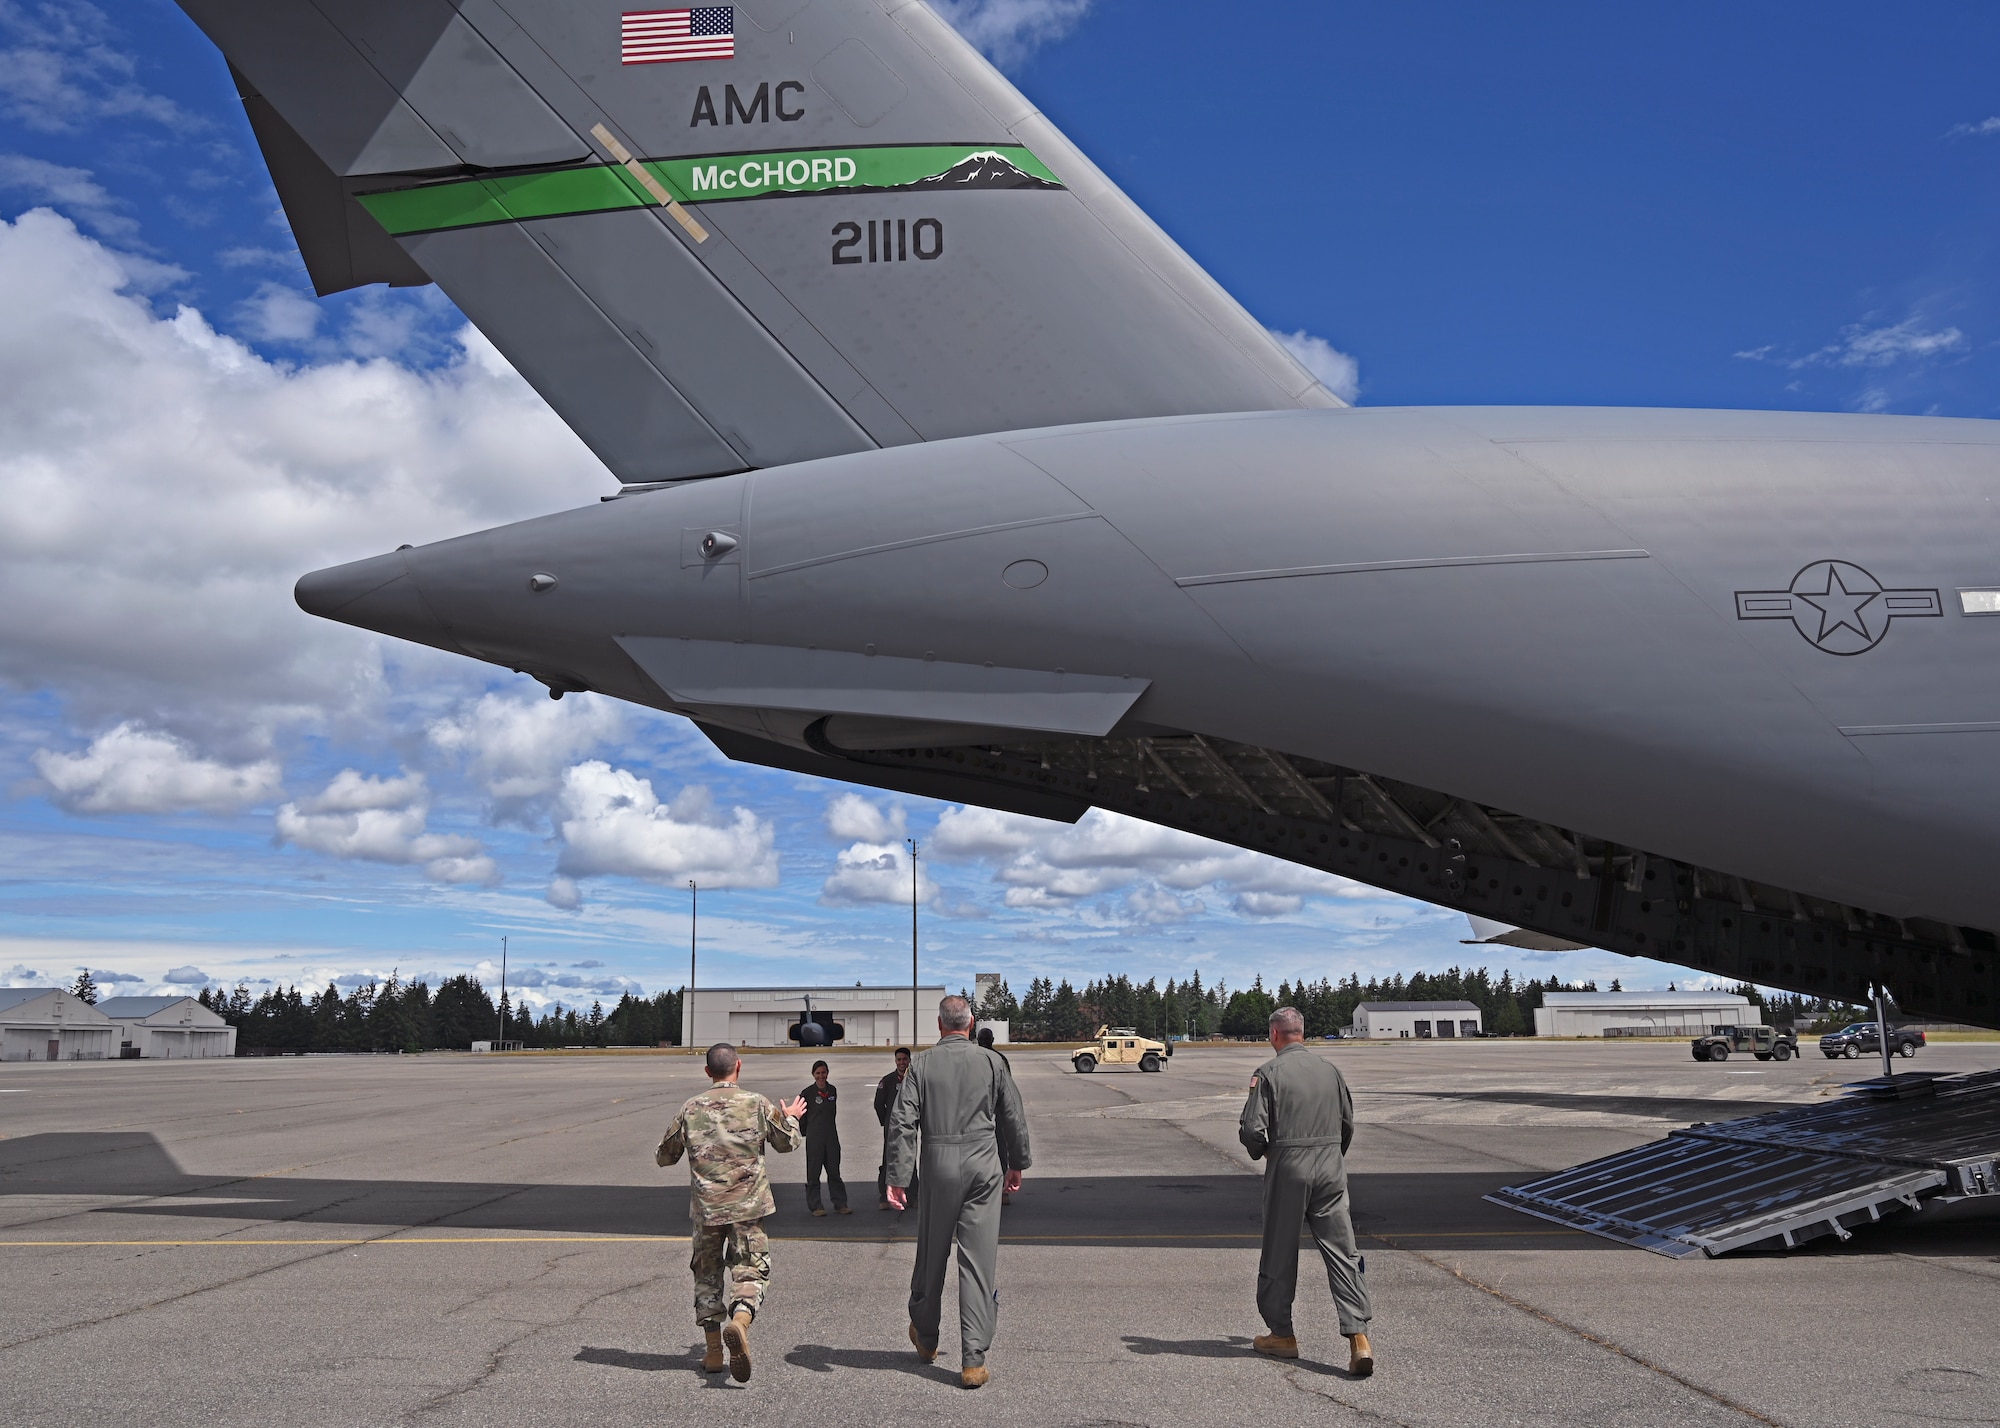 U.S. Air Force Chief Master Sgt. Brian Kruzelnick, left, Air Mobility Command command chief, Gen. Mike Minihan, center, AMC commander, and Col. David Fazenbaker, 62nd Airlift Wing commander, walk towards a C-17 Globemaster III at Joint Base Lewis-McChord, Washington, July 7, 2022. Minihan and Kruzelnick spent two days experiencing the mission and priorities of America’s Airlift Wing. (U.S. Air Force photo by Senior Airman Callie Norton)